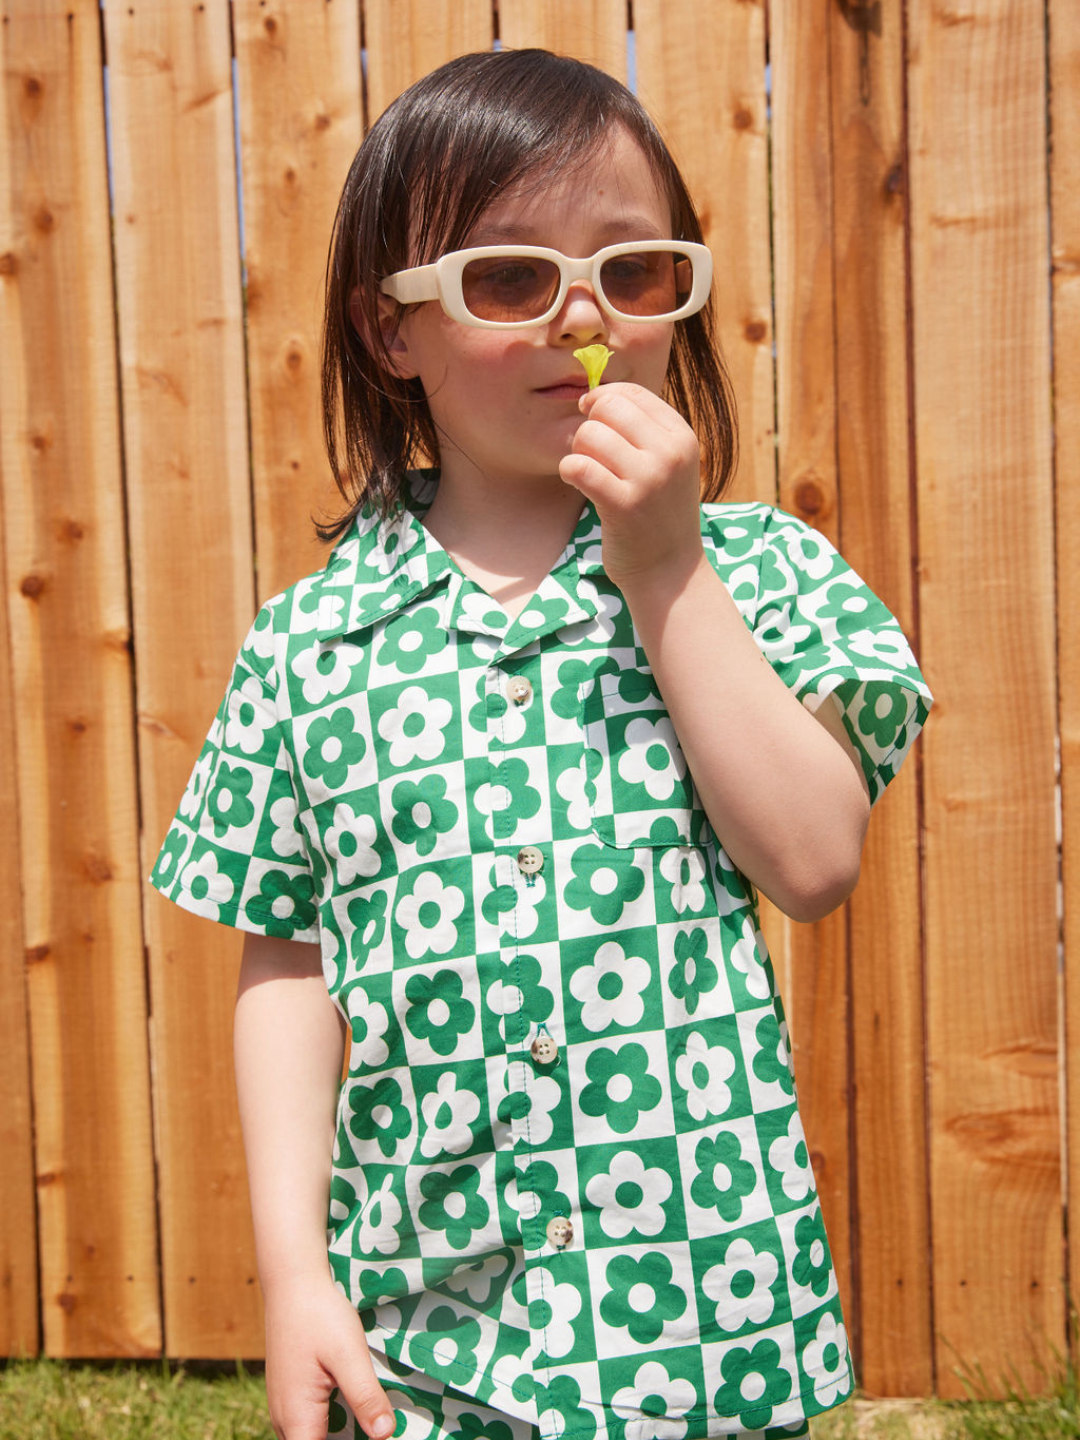 Pine | Child in sunglasses showing the shirt of a kids' short set in a checkerboard pattern of green and white flowers